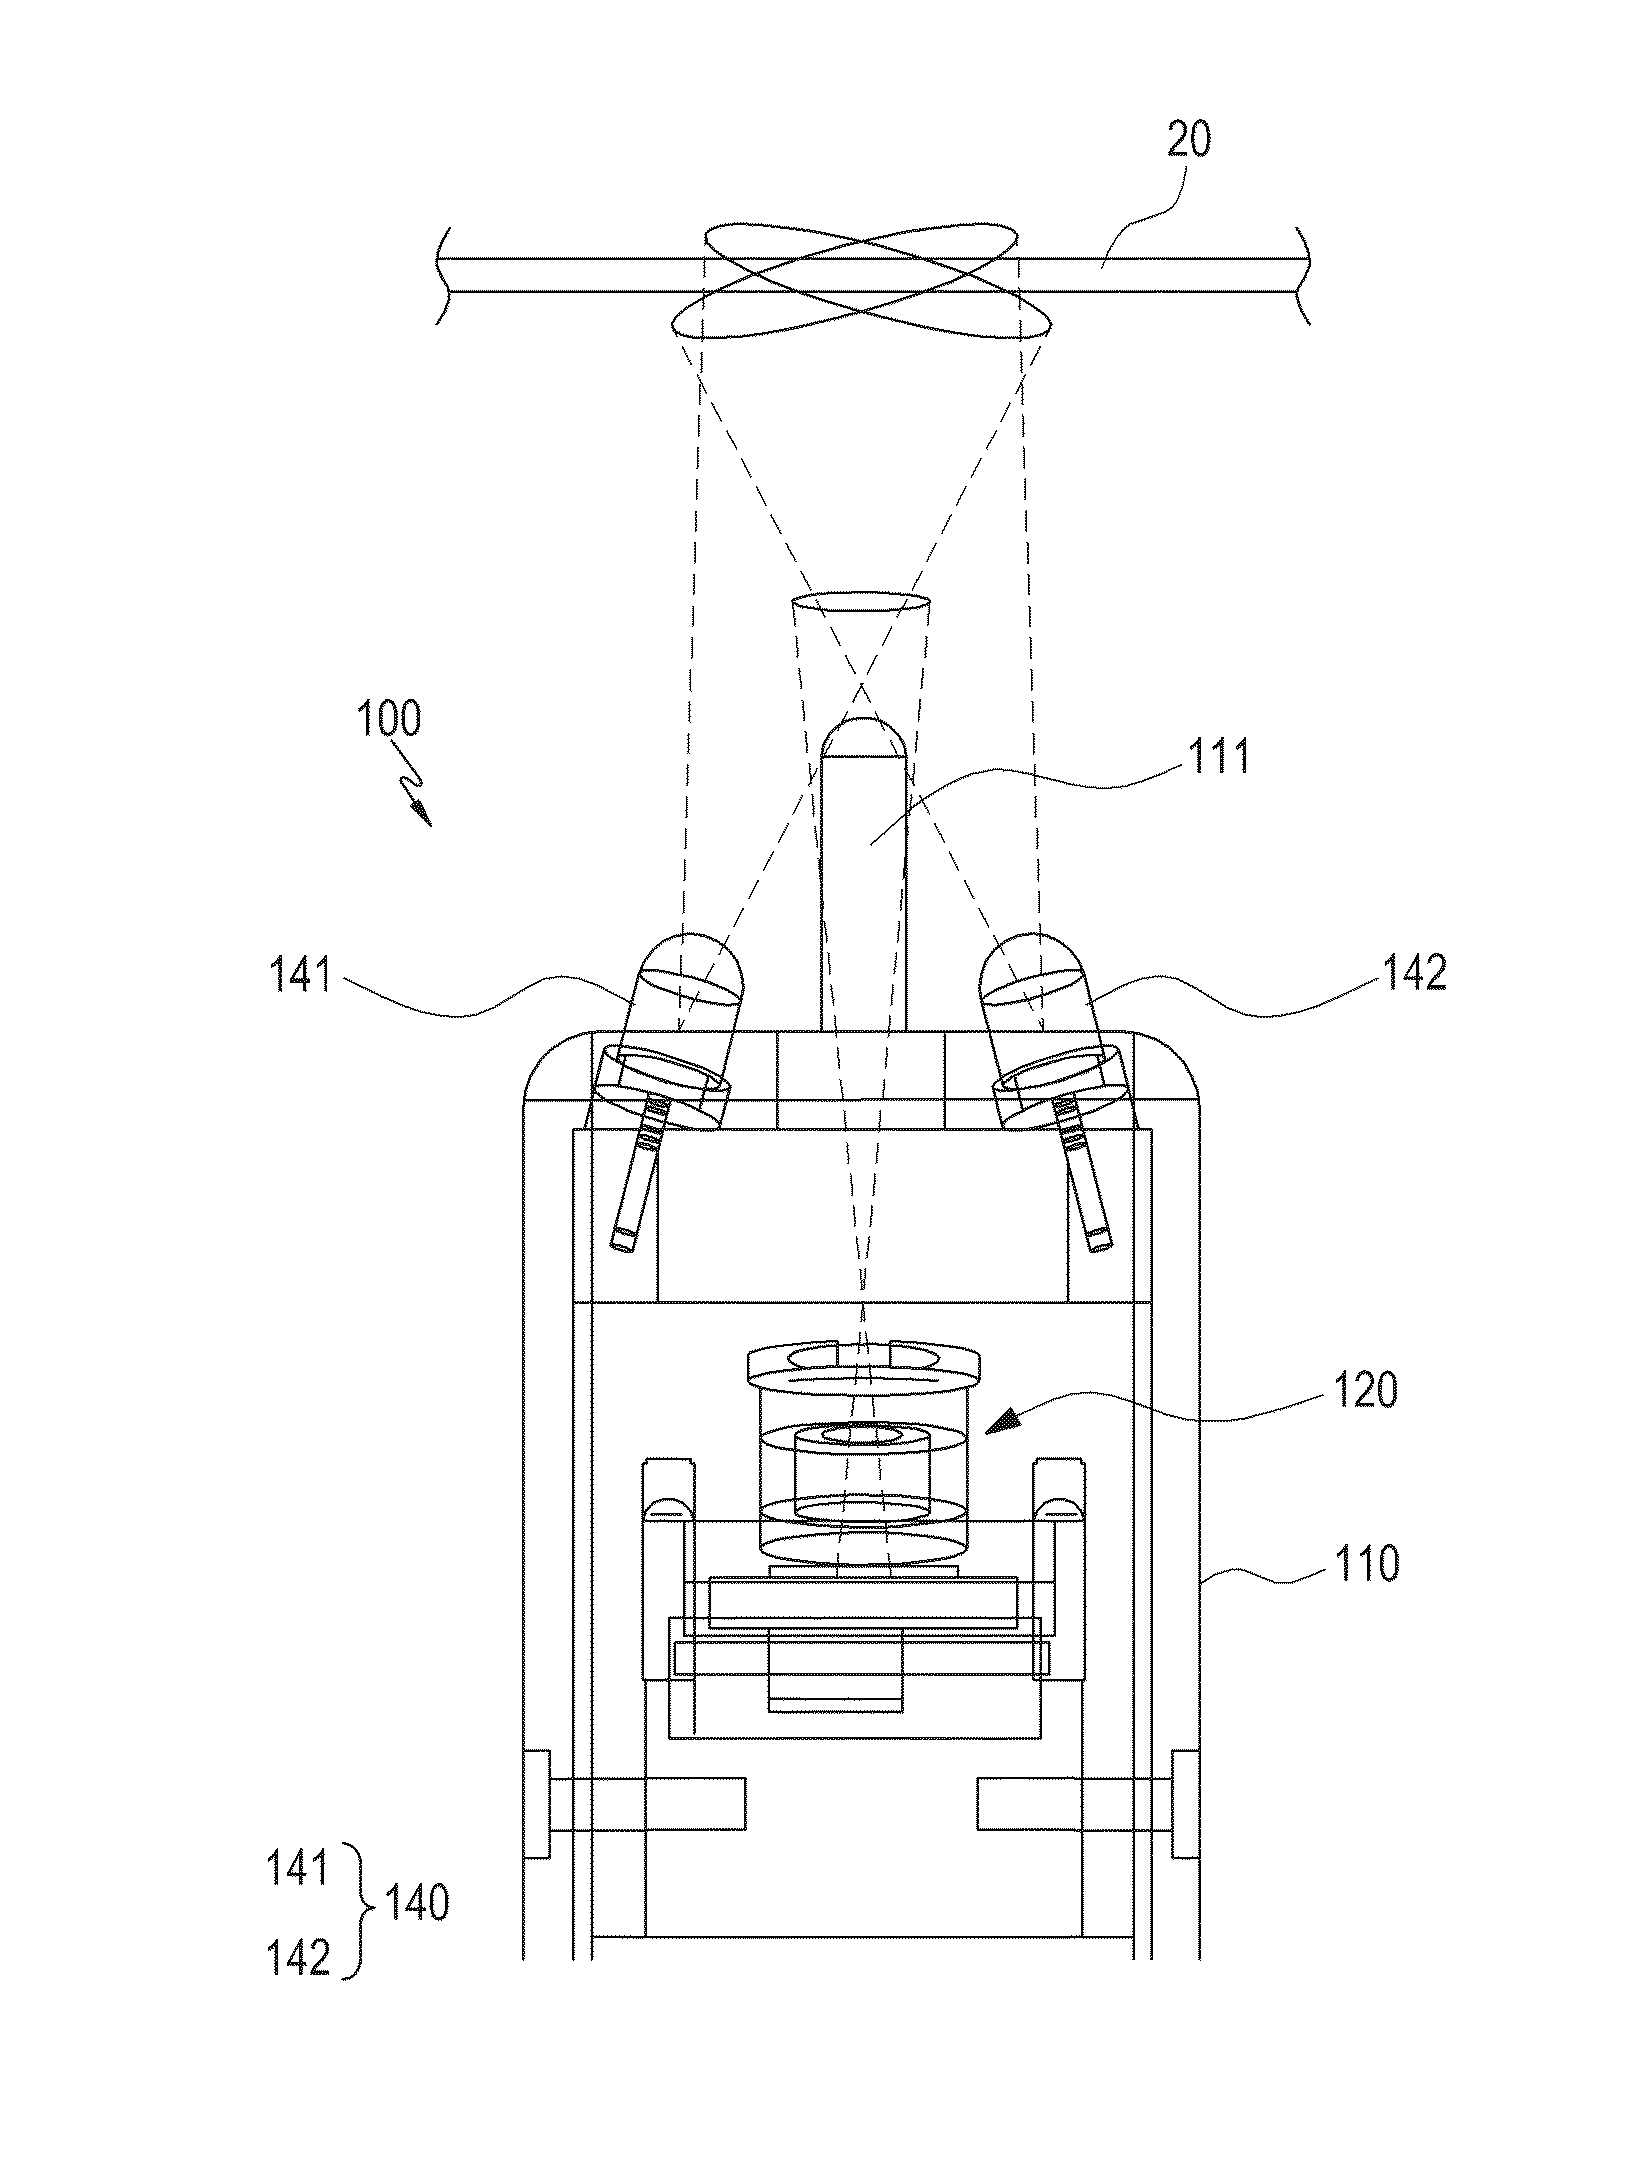 Optical input apparatus wherein light sources selectively emit light as the apparatus is inclined